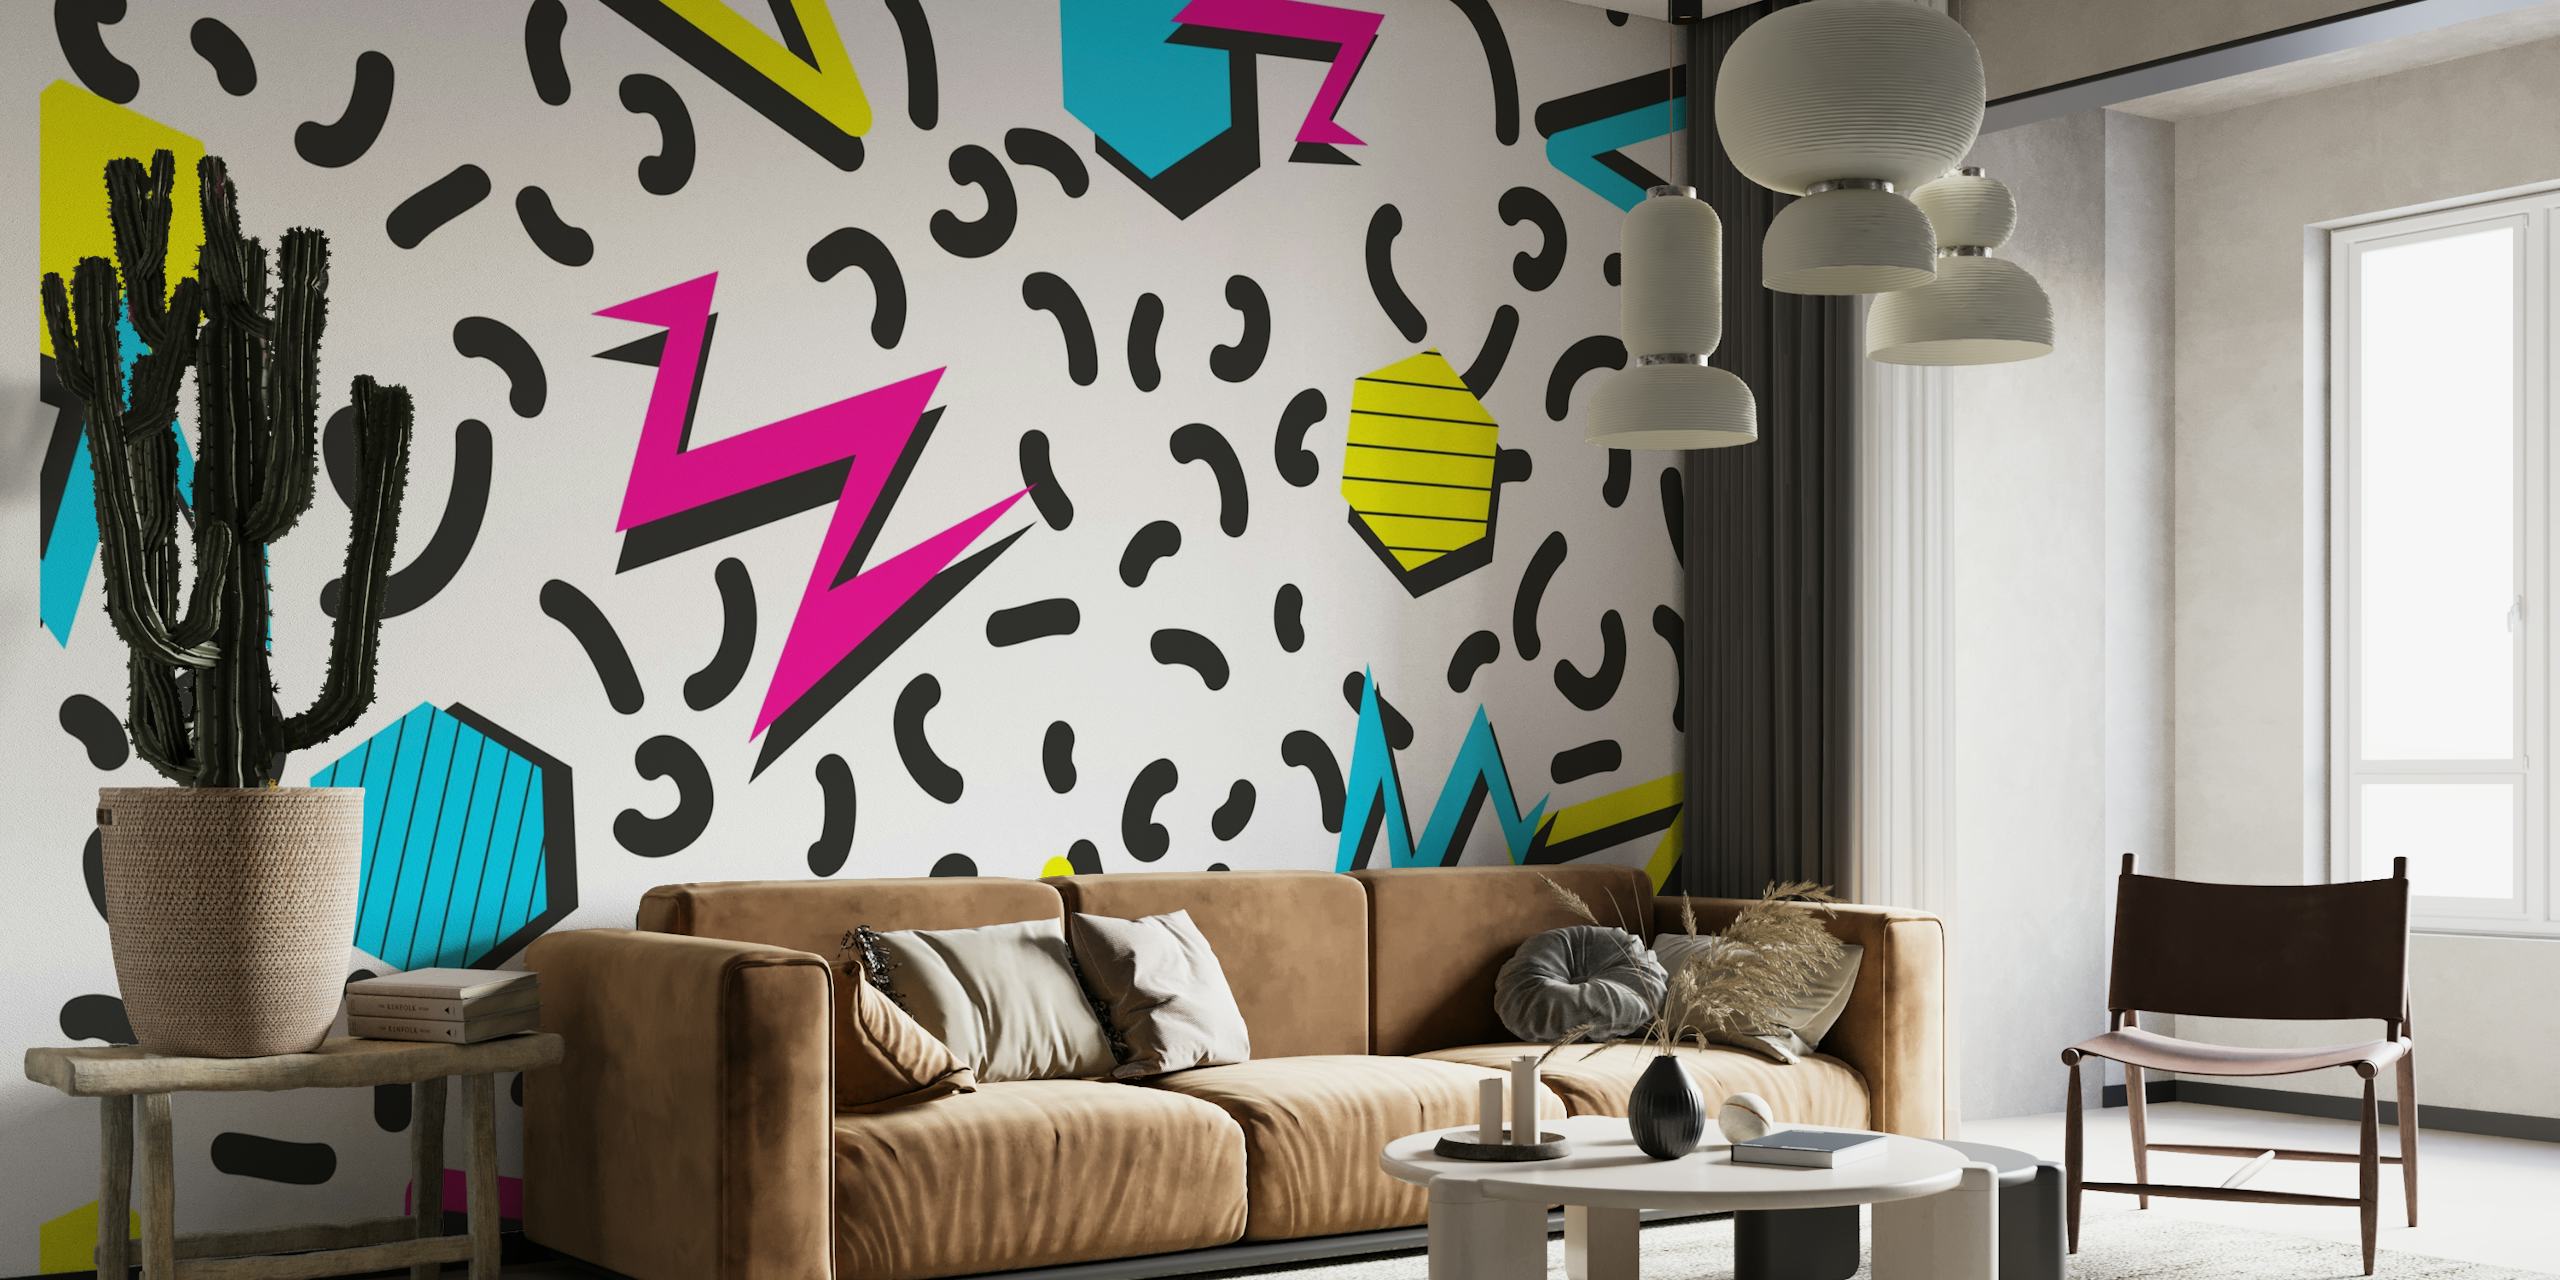 Trendy neon-colored geometric shapes and doodles wall mural